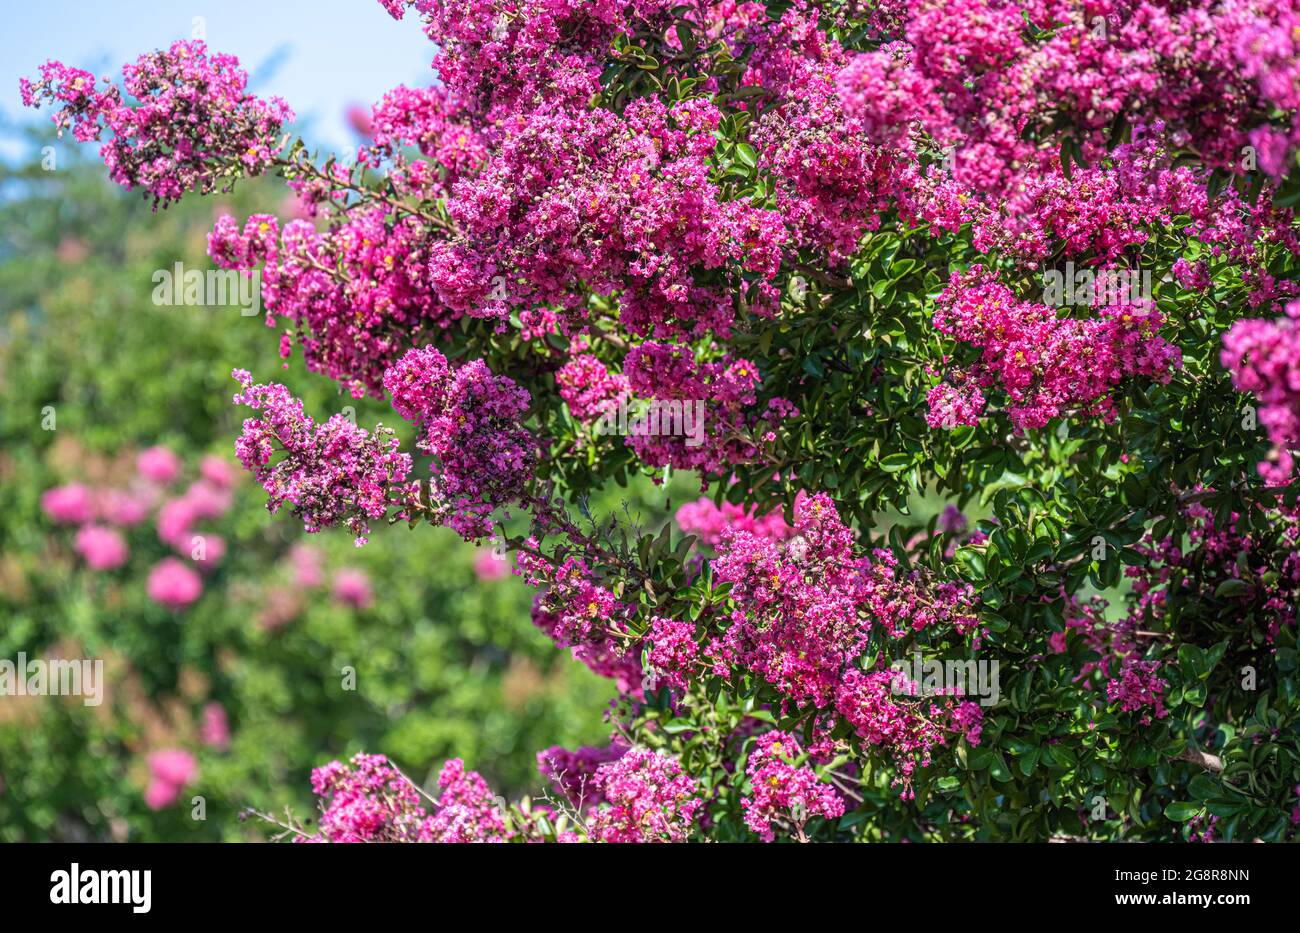 Beautiful pink blossoms on Crape Myrtle (Lagerstroemia) trees in Snellville, Georgia. (USA) Stock Photo